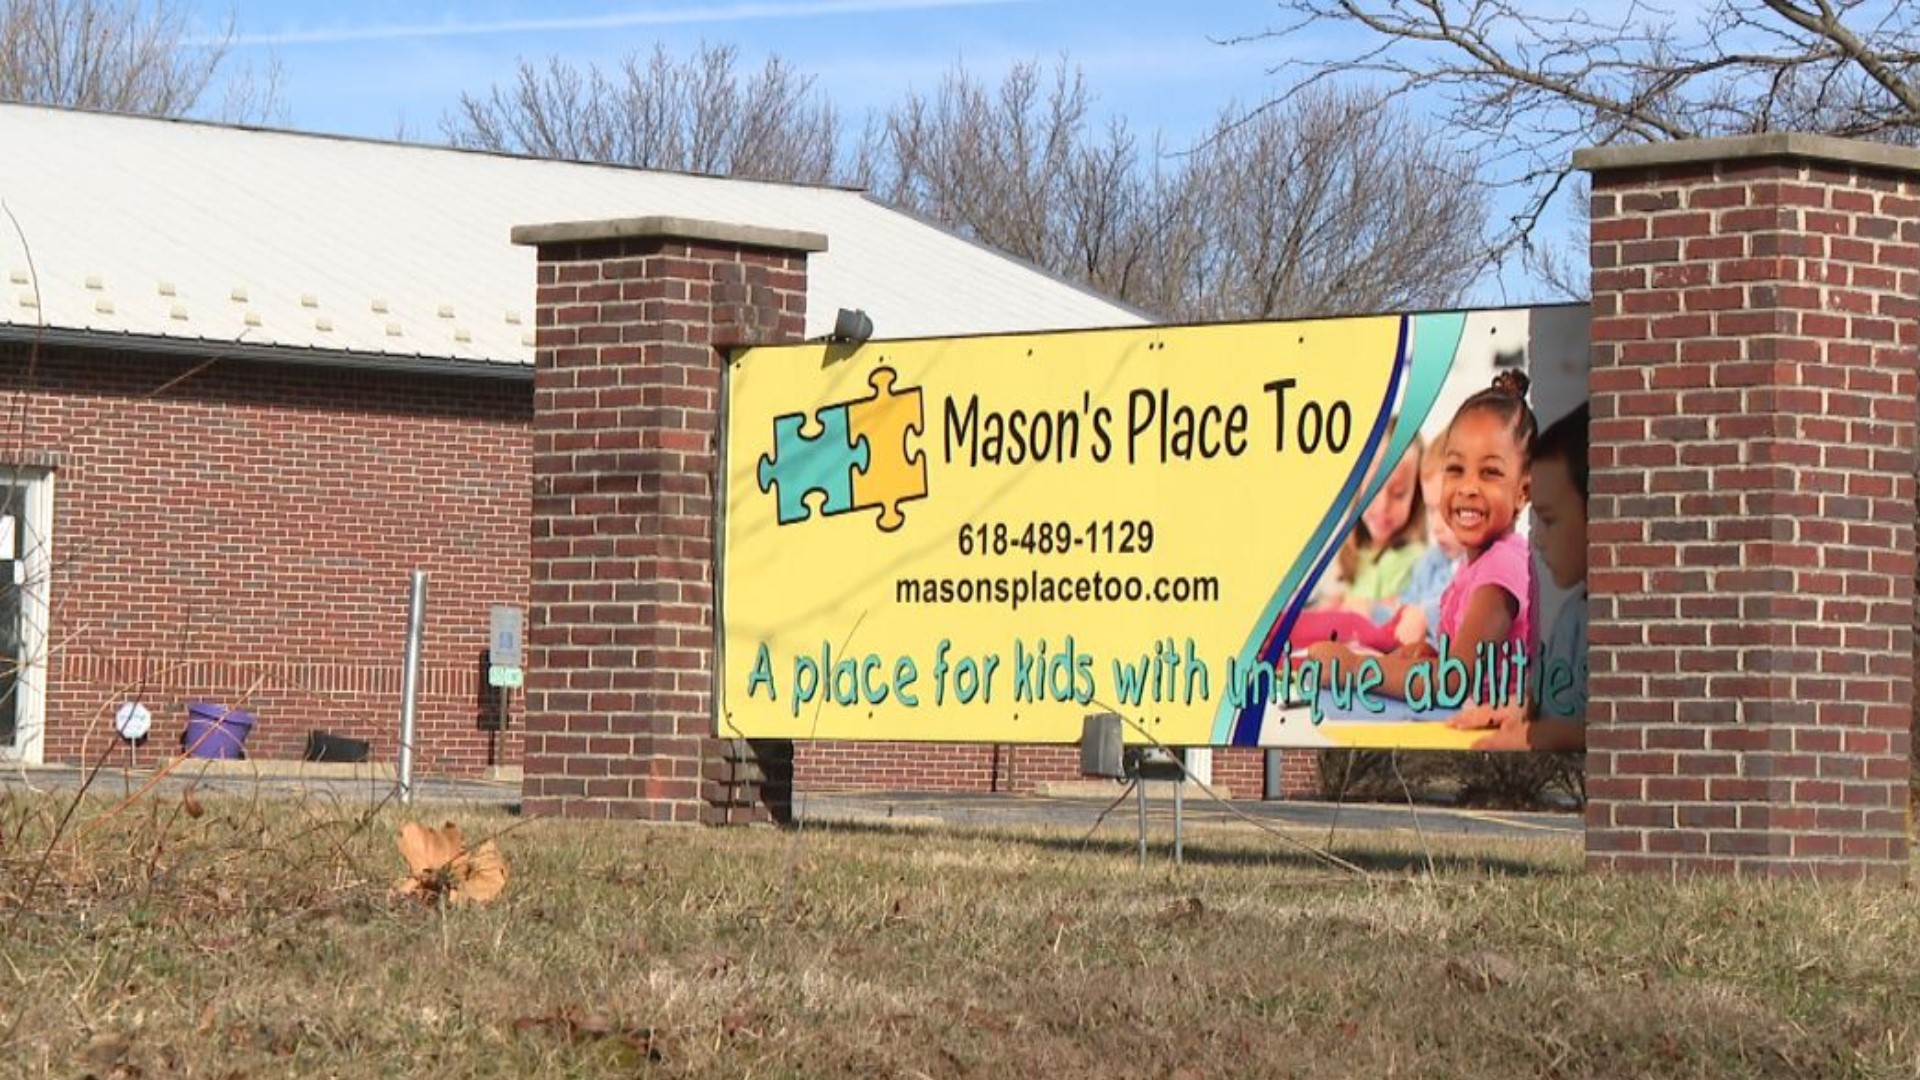 Trena McCoy said she saw the need for such a facility after her son Mason, who has autism, was physically abused at a local school